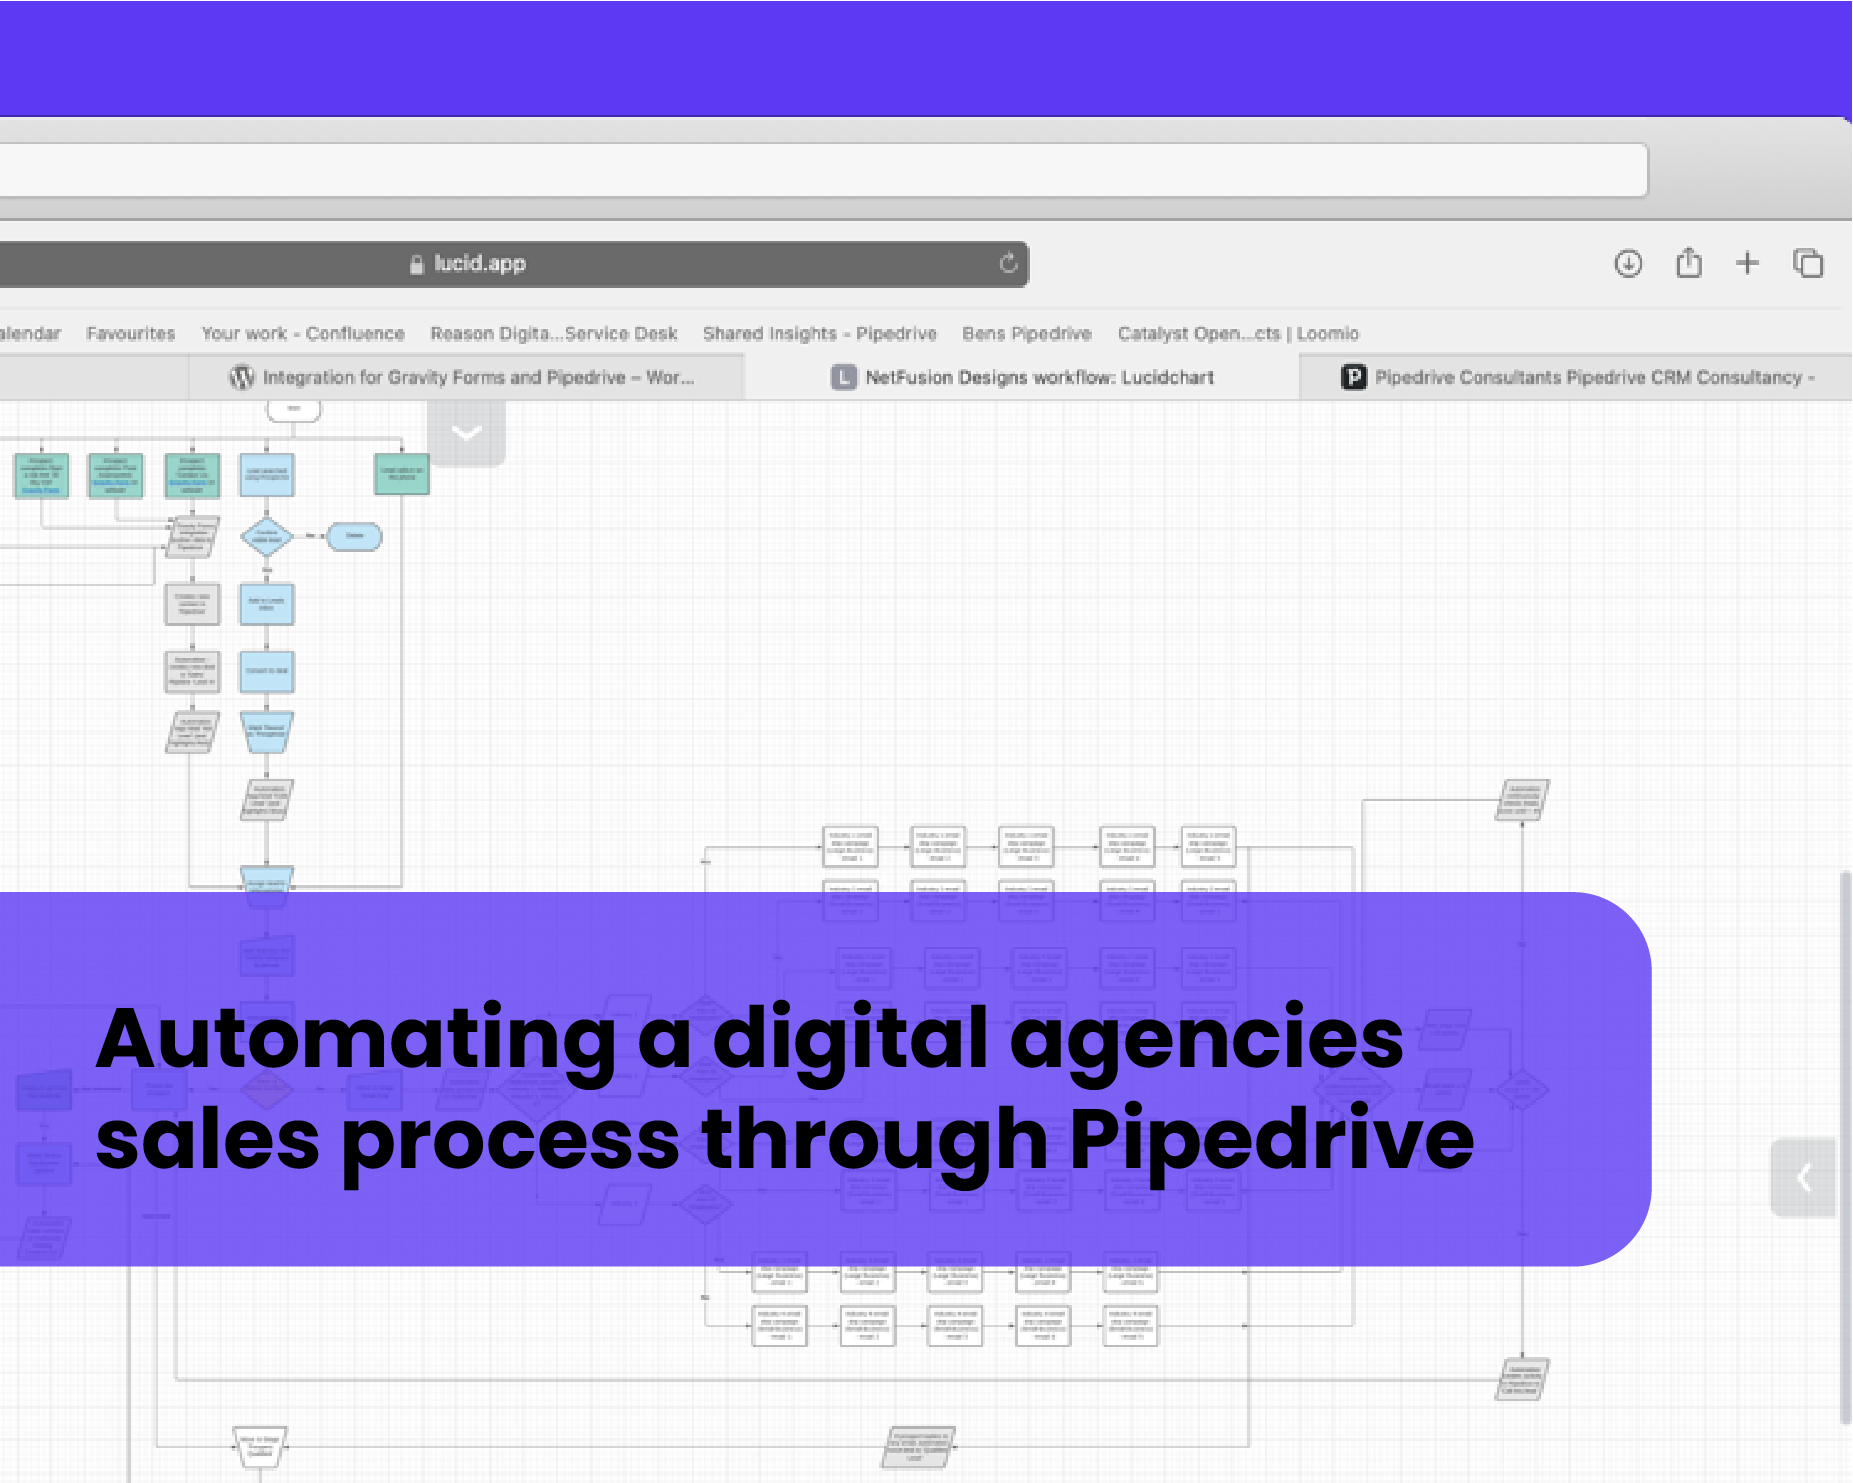 Automating Pipedrive for Agencies